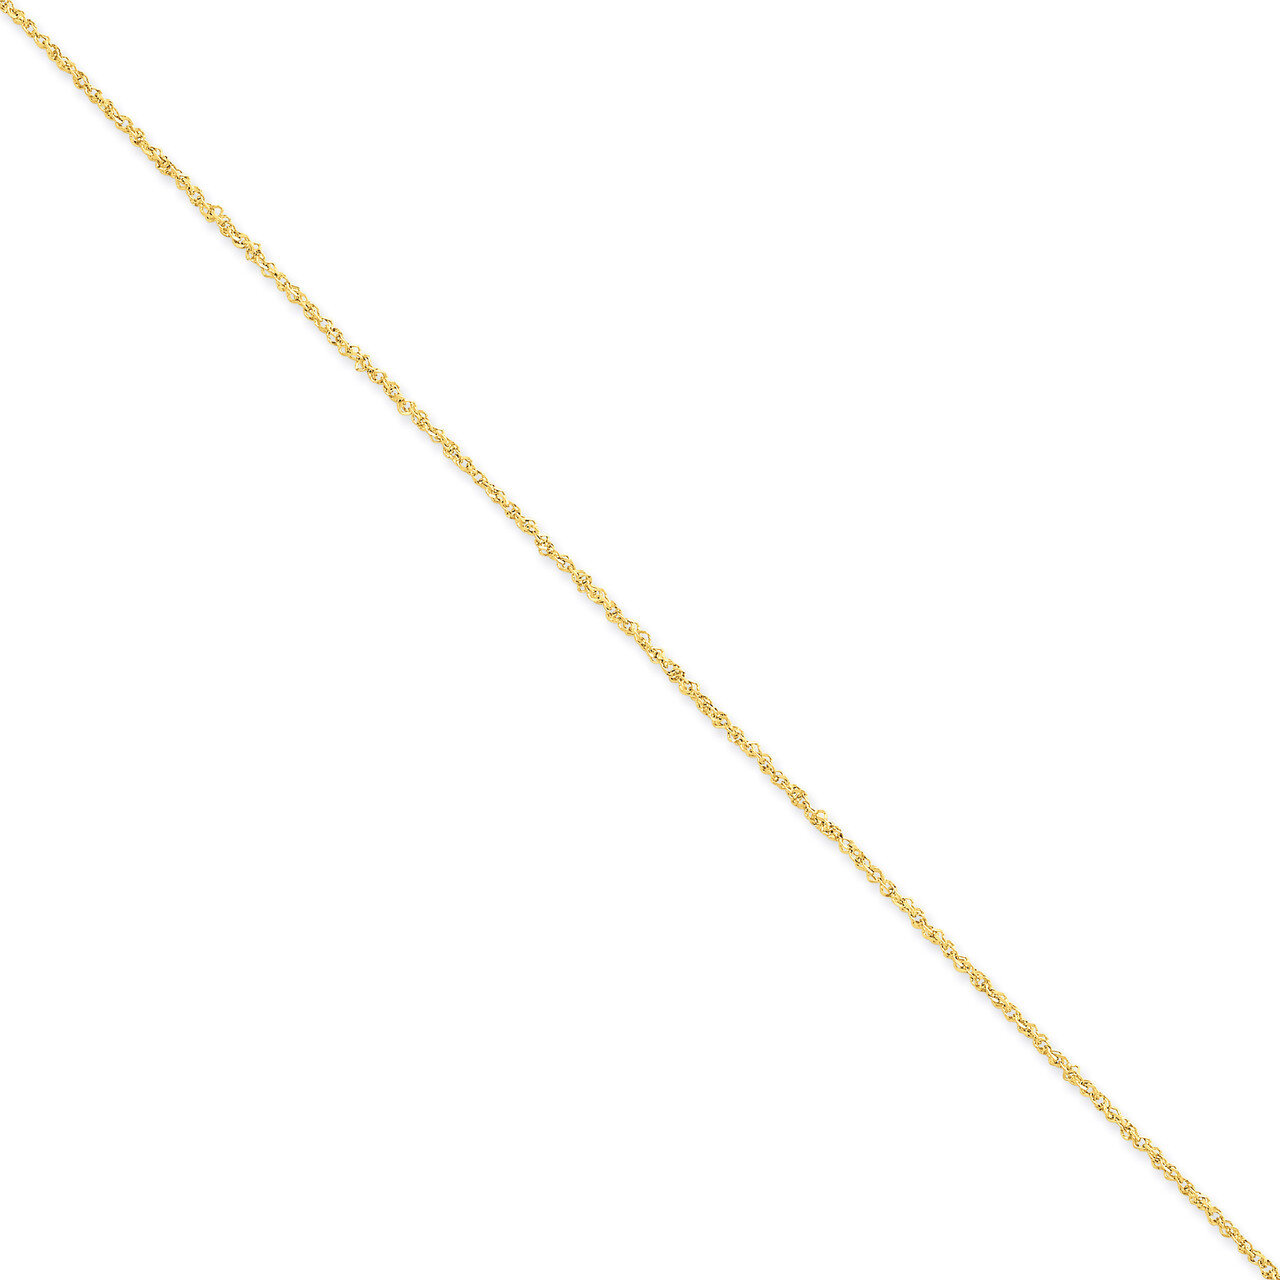 1.7mm Ropa Chain 24 Inch 14k Gold RPA028-24